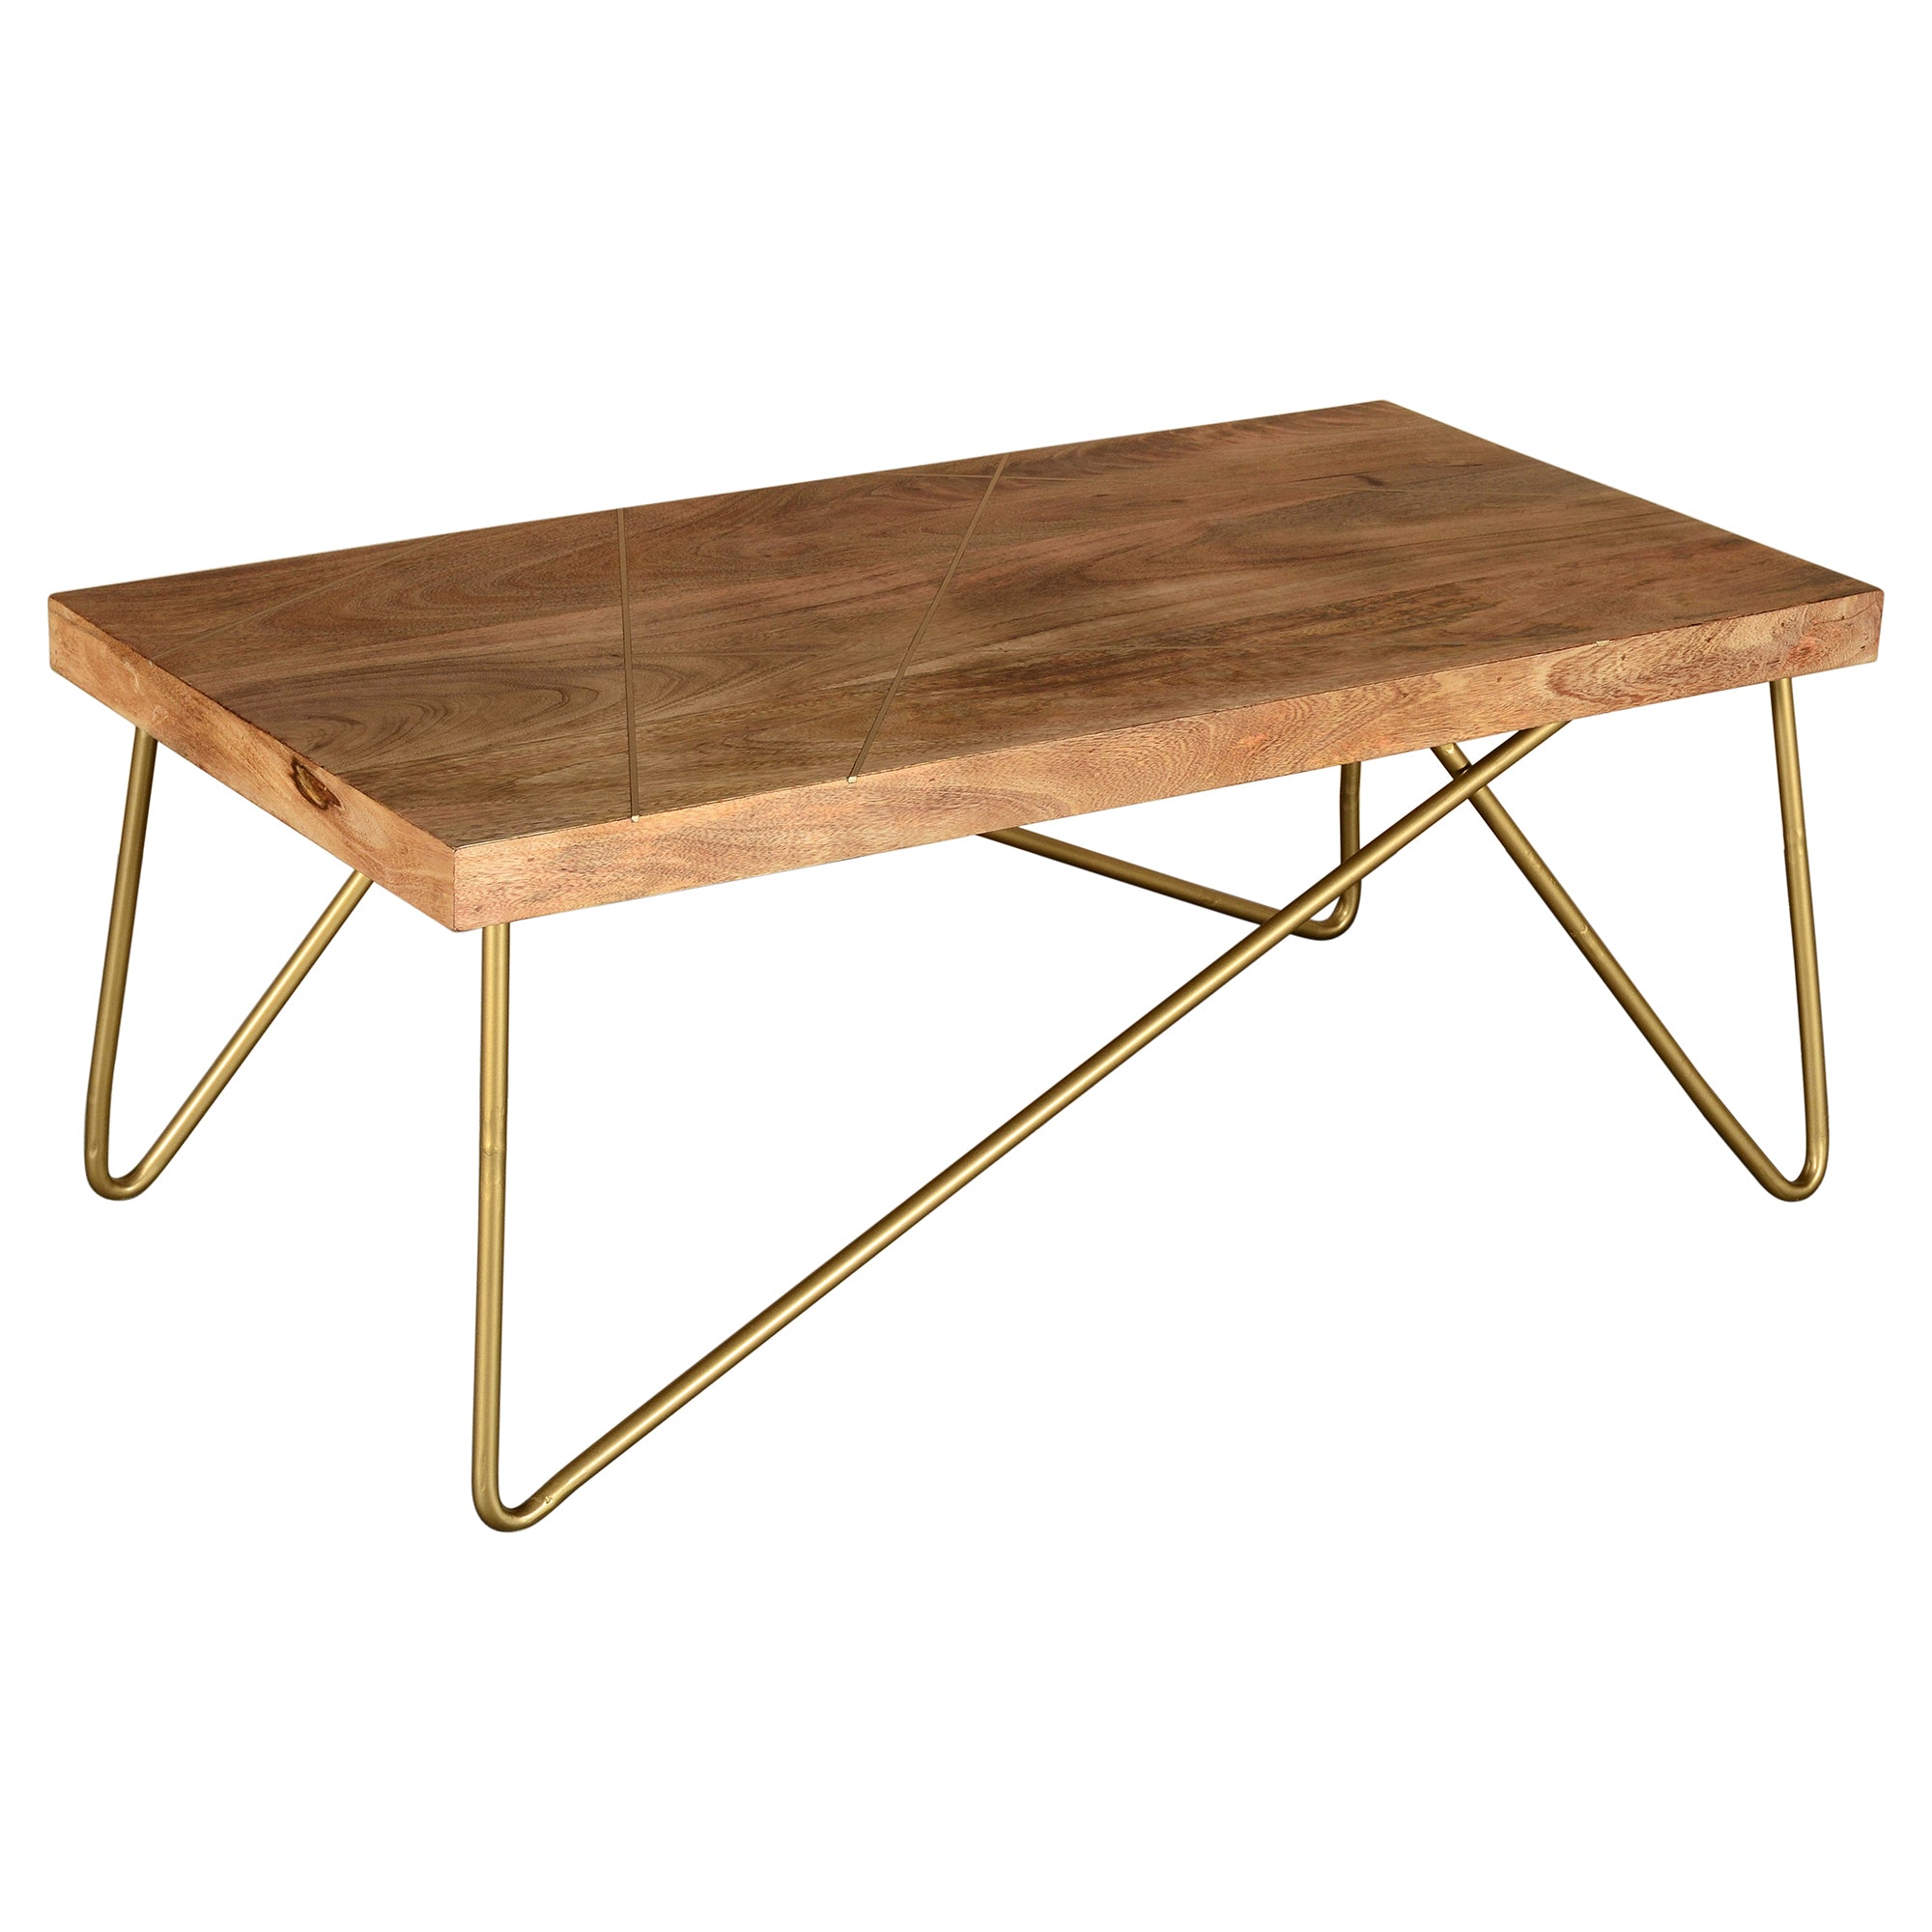 Madox Coffee Table in Natural and Aged Gold 301-527NT